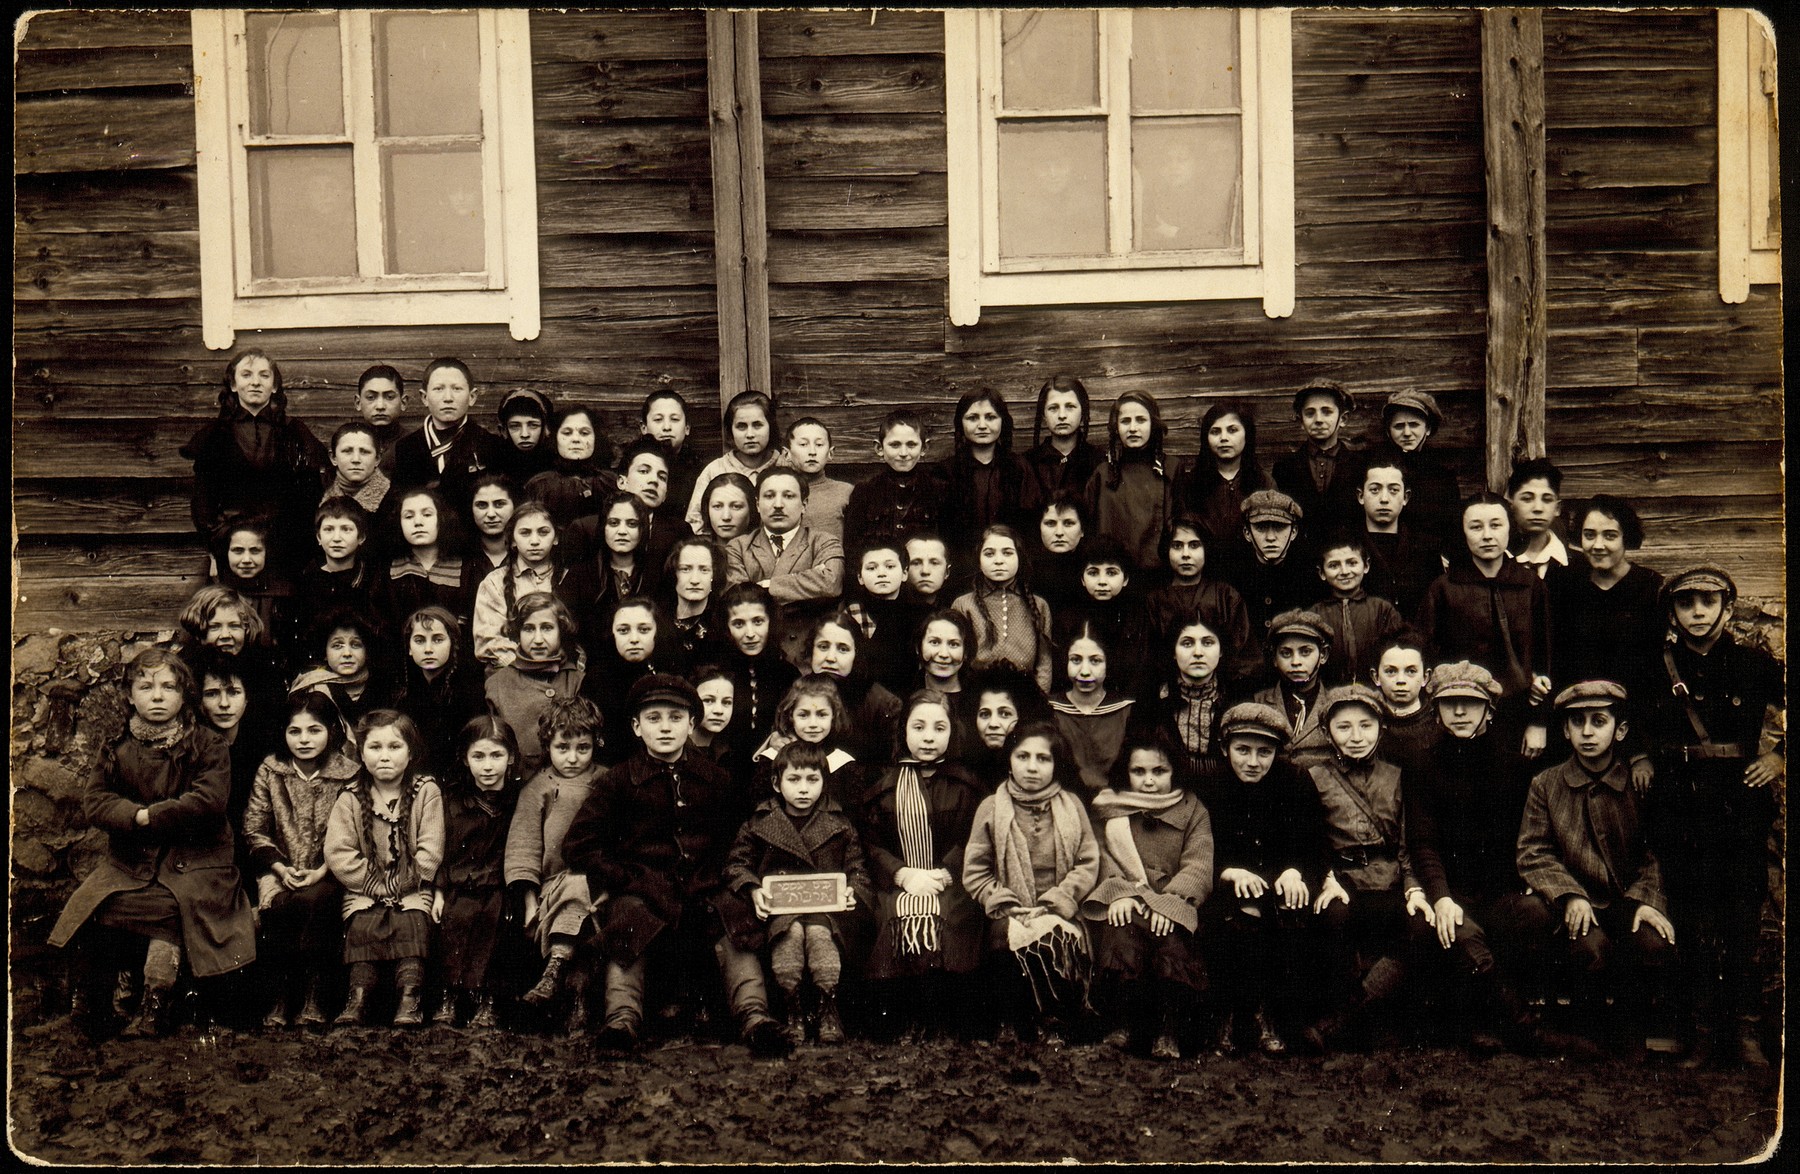 Students of the Tarbut school in Eisiskes. 

The teacher, Mr. Pitochowski is sitting with his arms crossed.